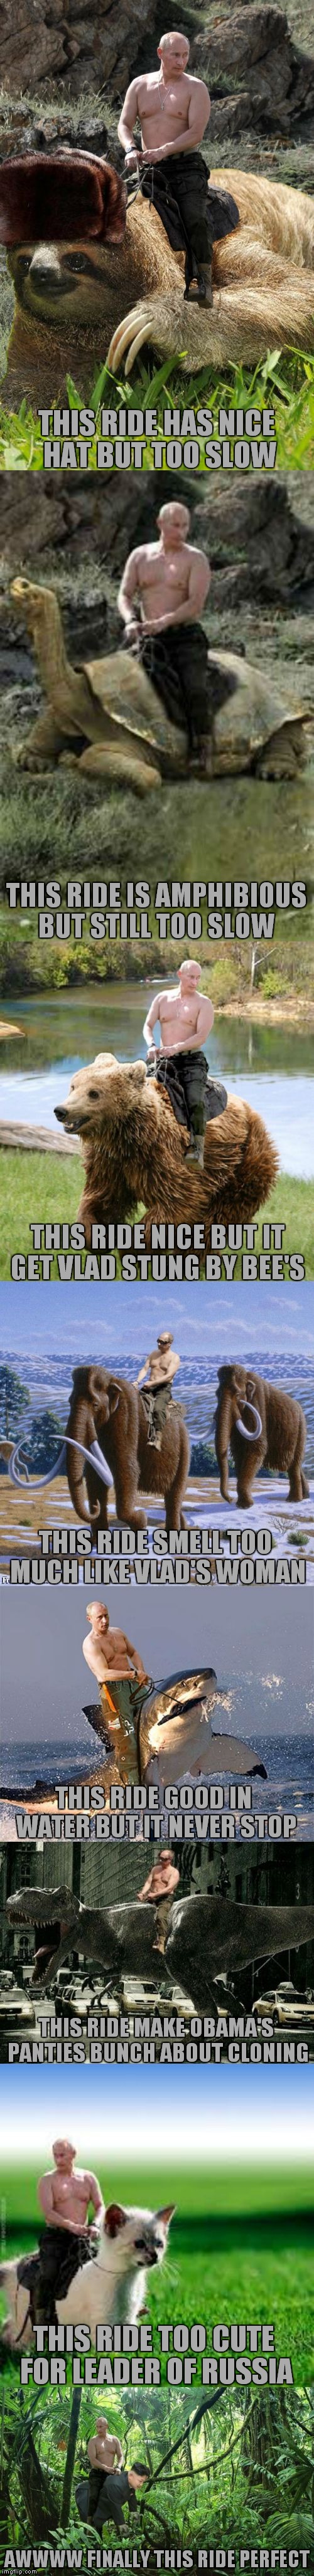 The history of Vlad finding a ride... | THIS RIDE HAS NICE HAT BUT TOO SLOW; THIS RIDE IS AMPHIBIOUS BUT STILL TOO SLOW; THIS RIDE NICE BUT IT GET VLAD STUNG BY BEE'S; THIS RIDE SMELL TOO MUCH LIKE VLAD'S WOMAN; THIS RIDE GOOD IN WATER BUT IT NEVER STOP; THIS RIDE MAKE OBAMA'S PANTIES BUNCH ABOUT CLONING; THIS RIDE TOO CUTE FOR LEADER OF RUSSIA; AWWWW FINALLY THIS RIDE PERFECT | image tagged in vlad's rides | made w/ Imgflip meme maker